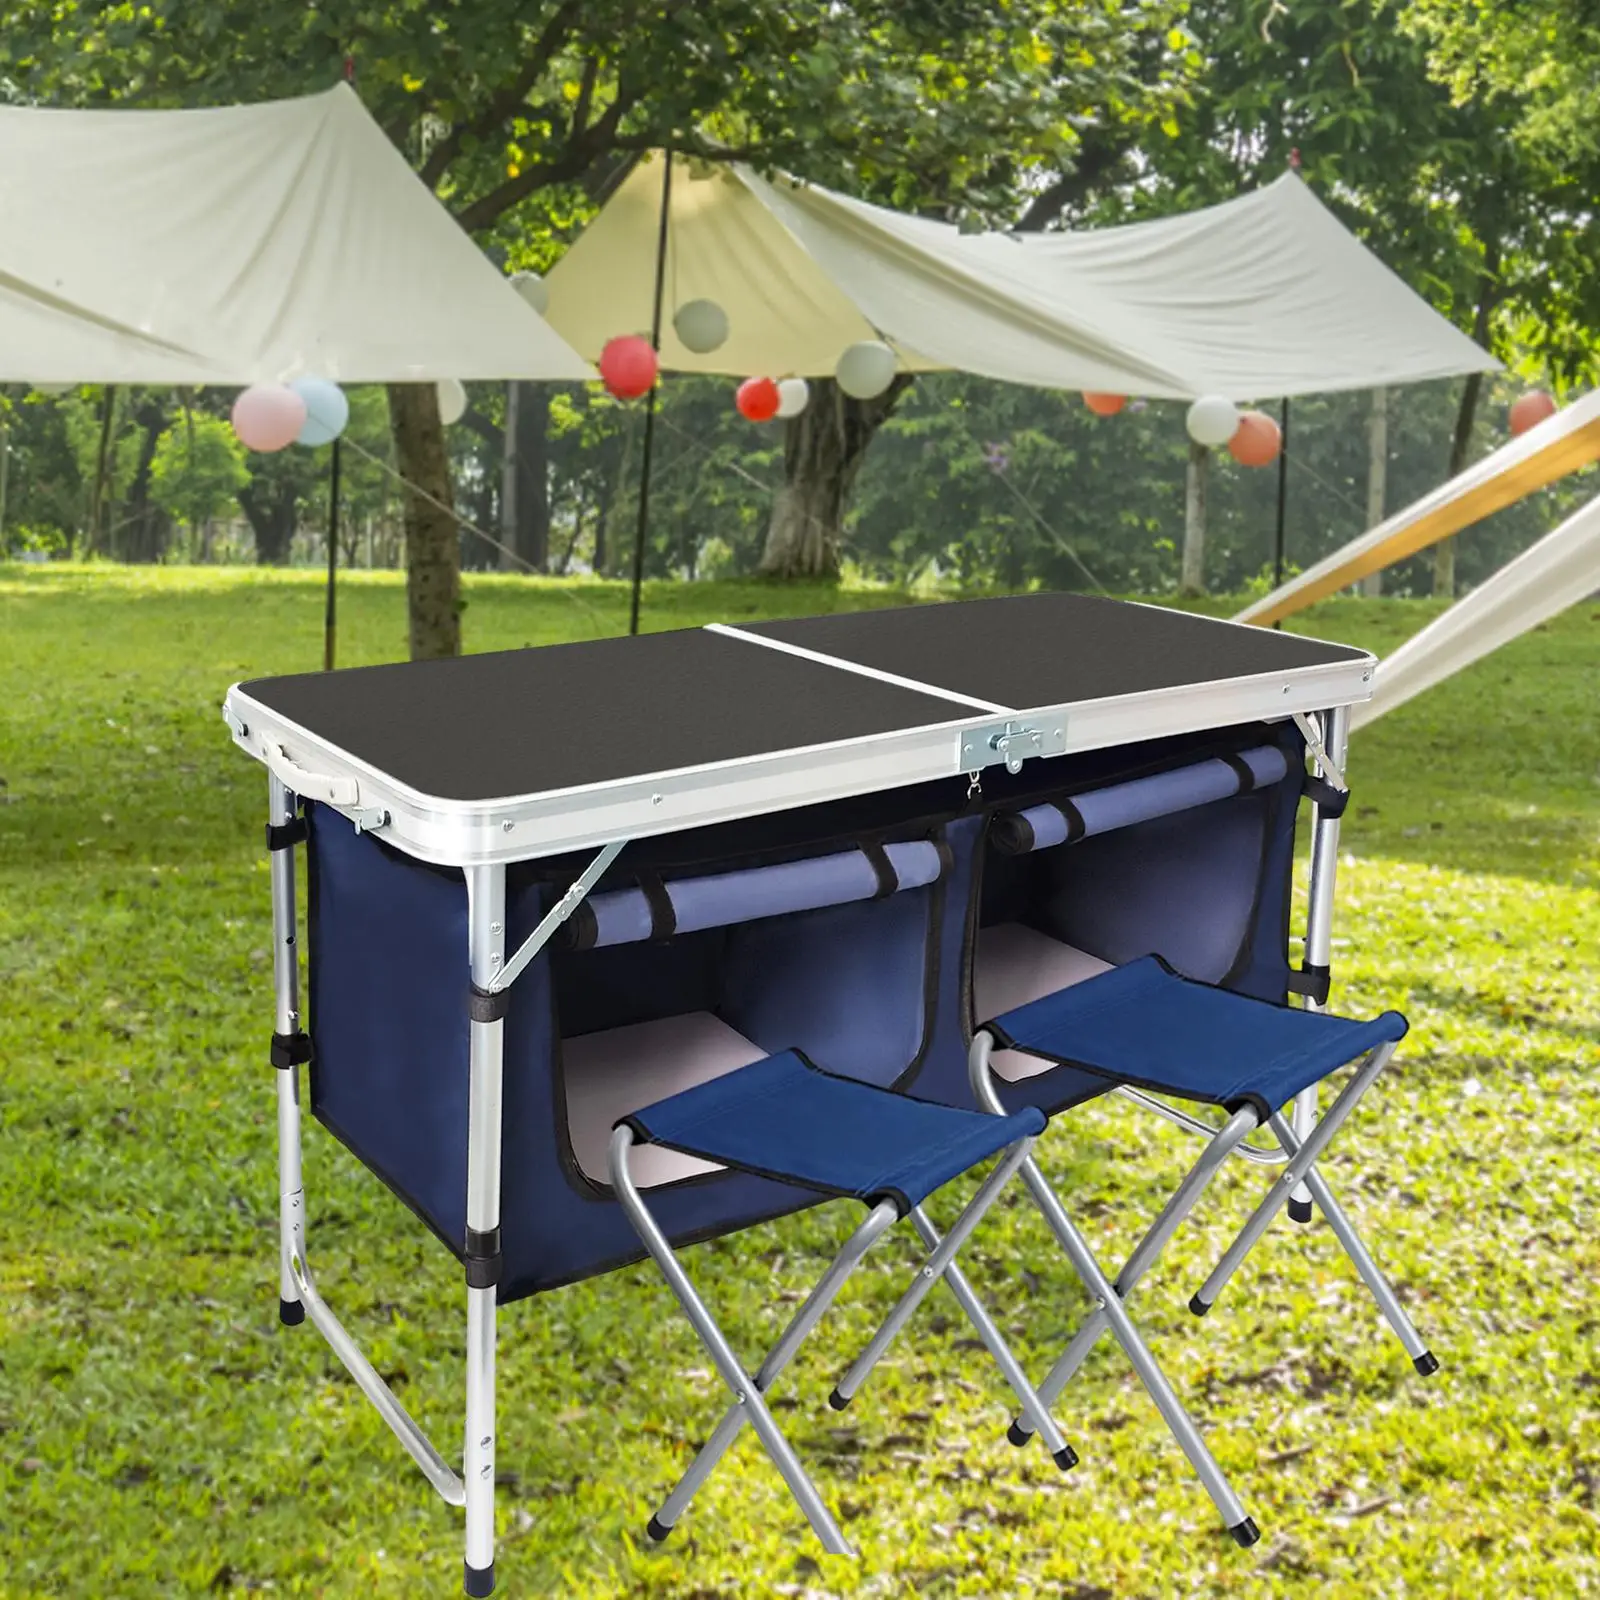 Portable Camping Table Rectangular with Double Storage Garden Furniture with 2 Chairs for Travel, Party, BBQ, Fishing, Picnic